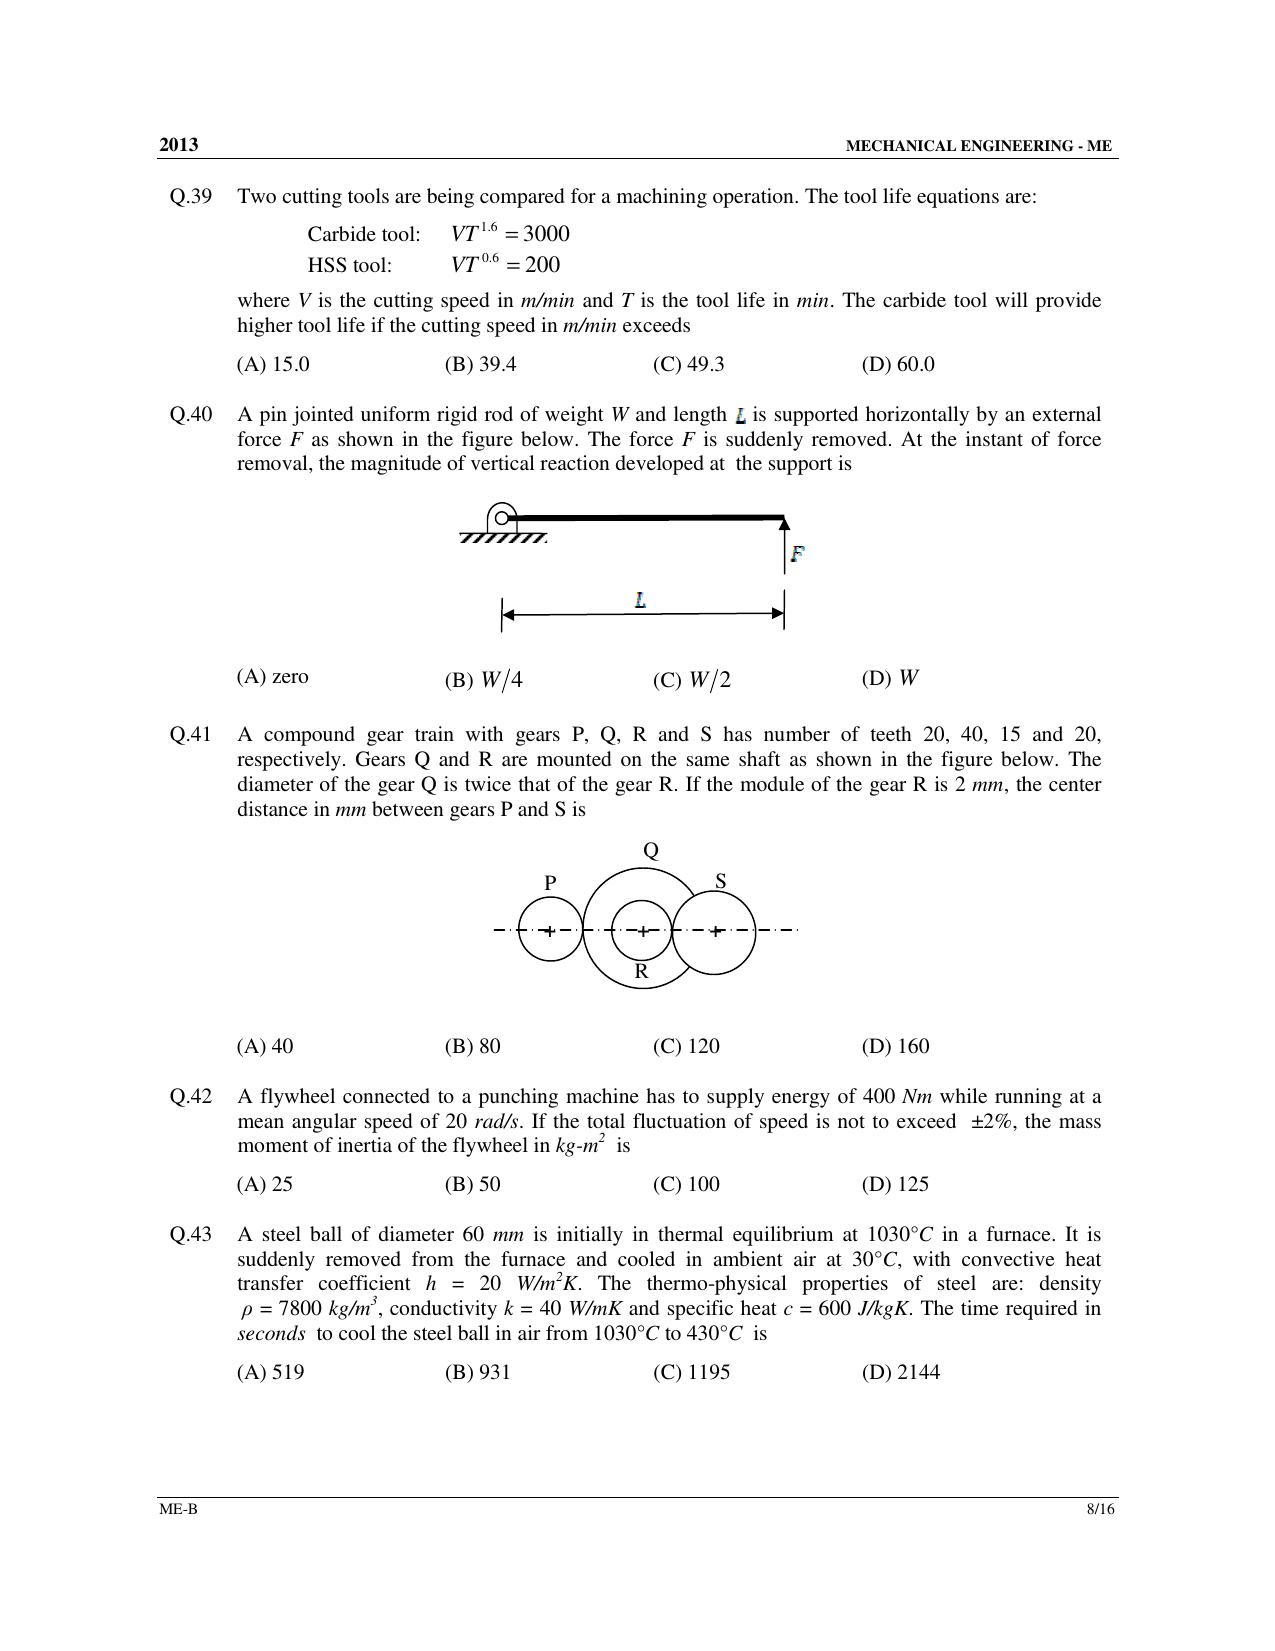 GATE 2013 Mechanical Engineering (ME) Question Paper with Answer Key - Page 23